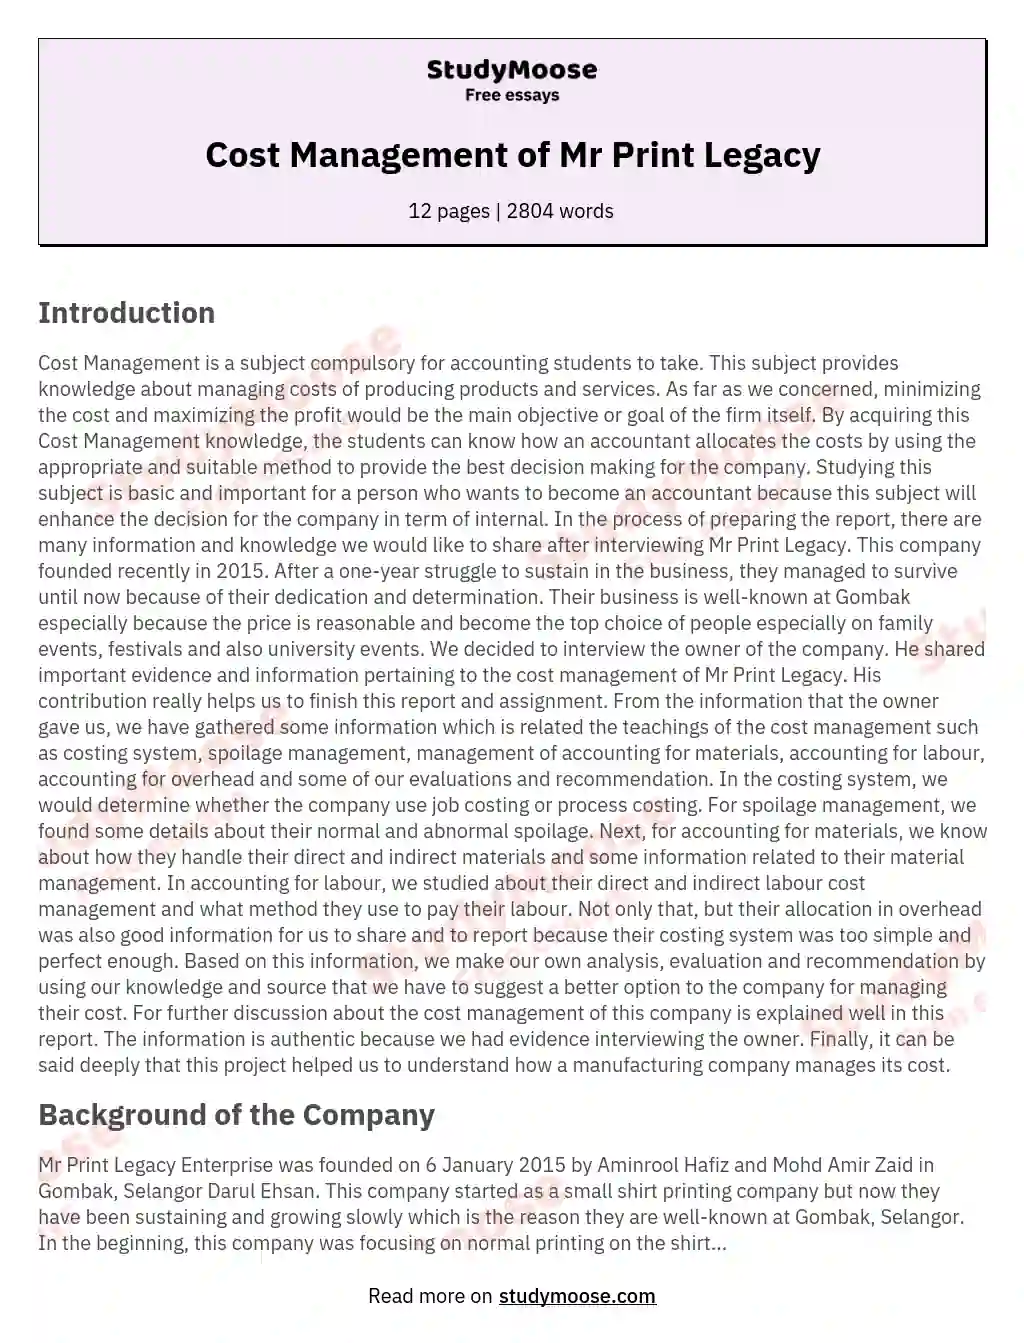 Cost Management of Mr Print Legacy essay